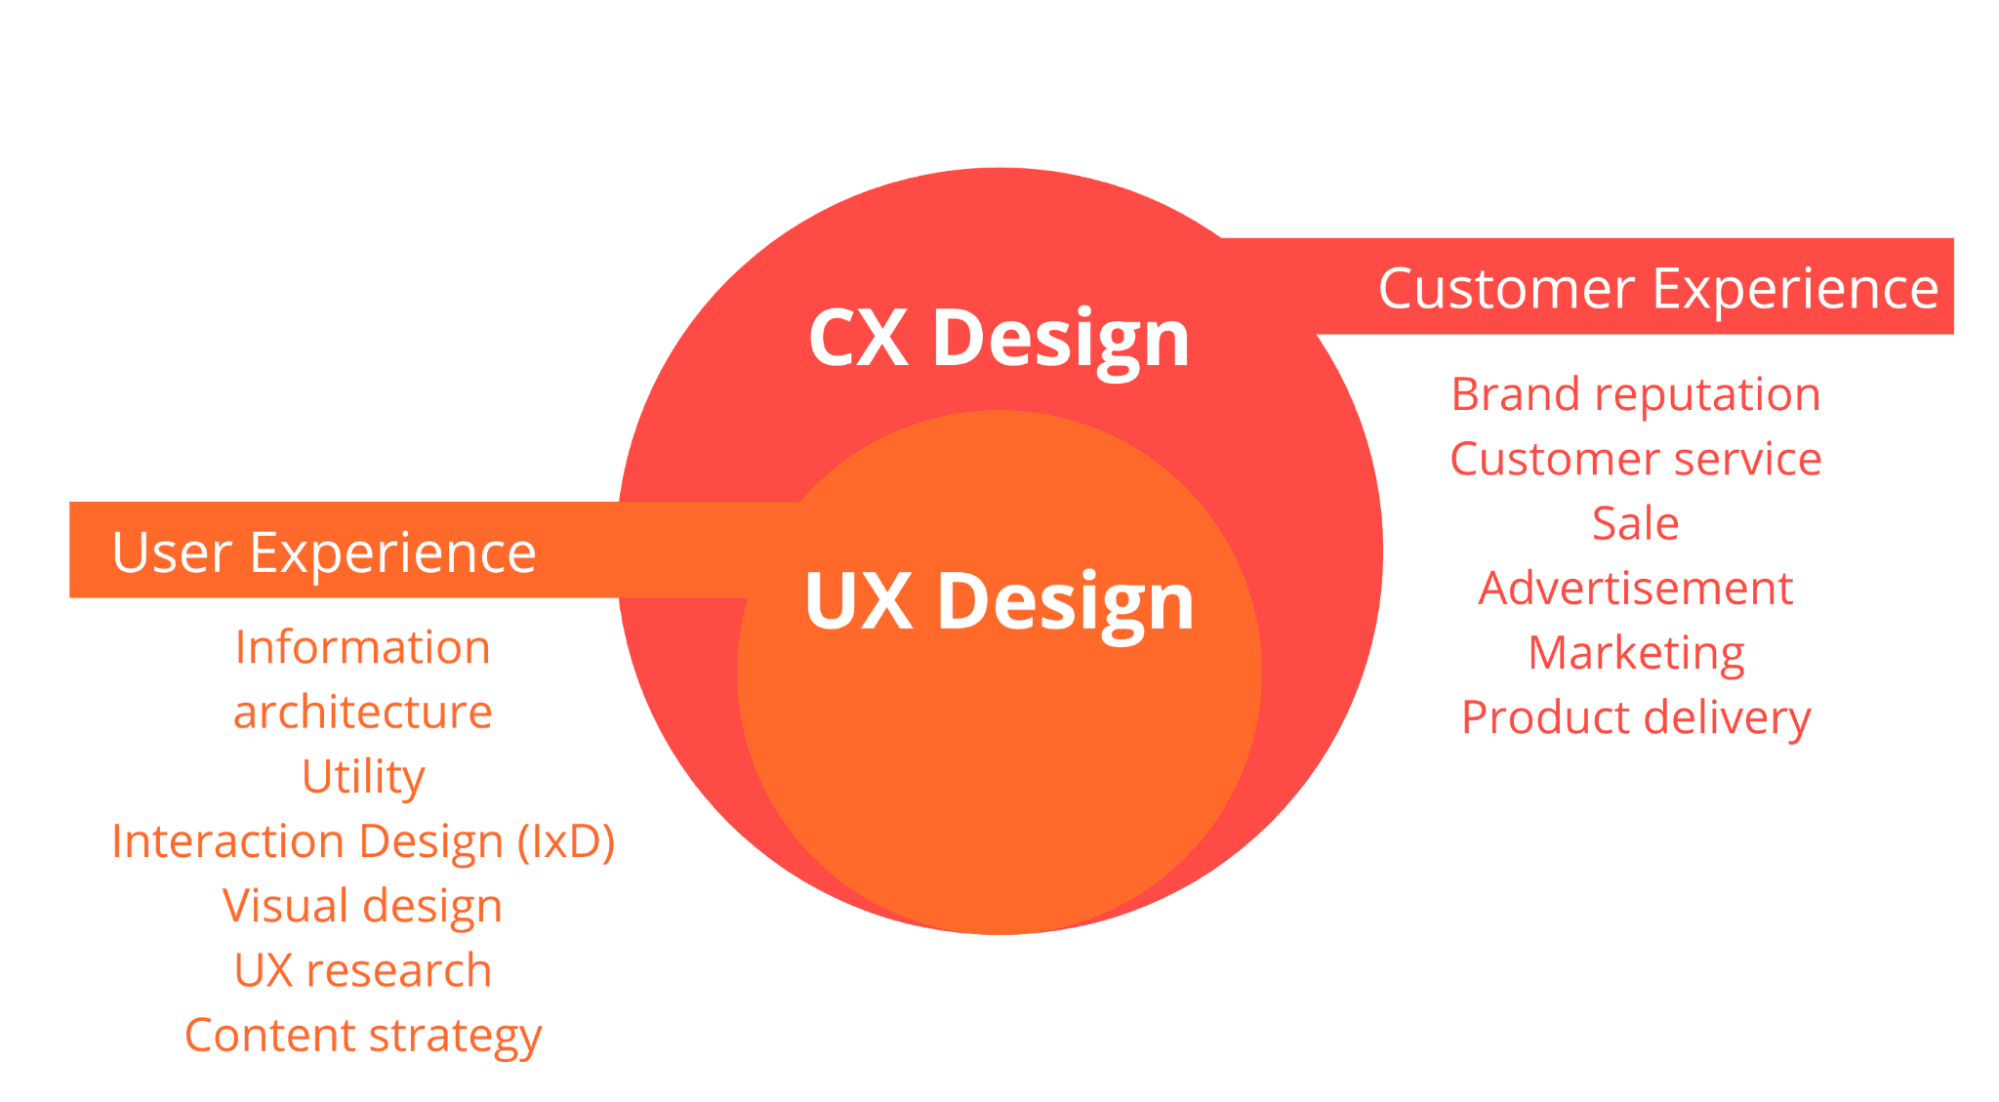 Definitions of Customer Experience and User Experience